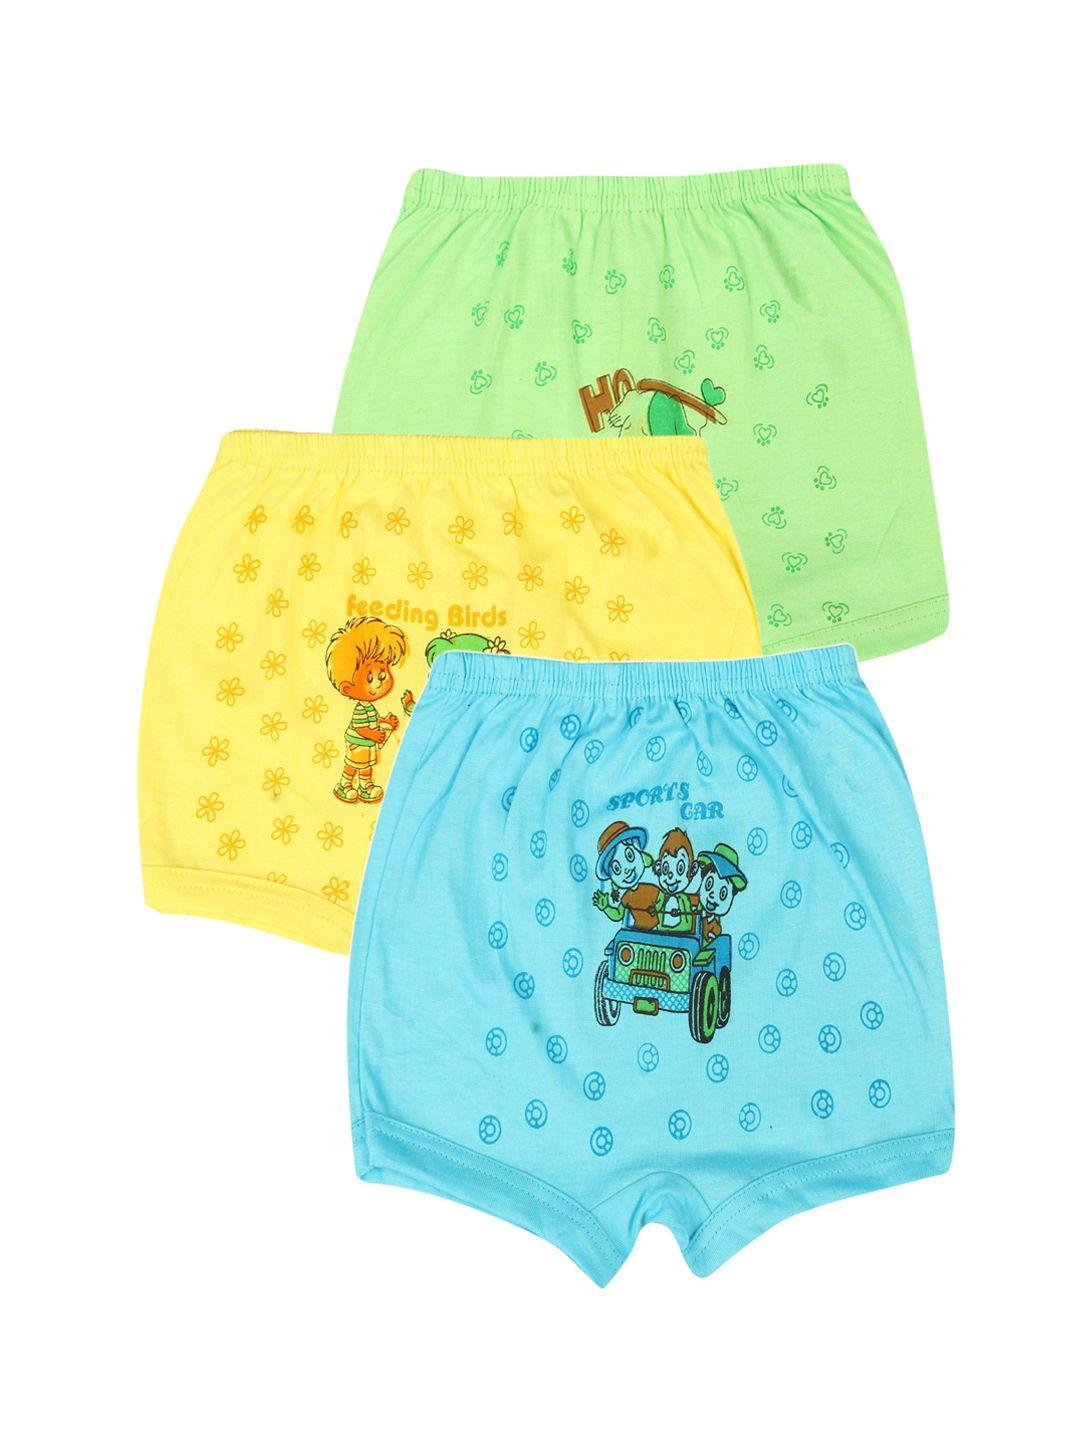 pride apparel boys pack of 3 printed pure cotton trunks